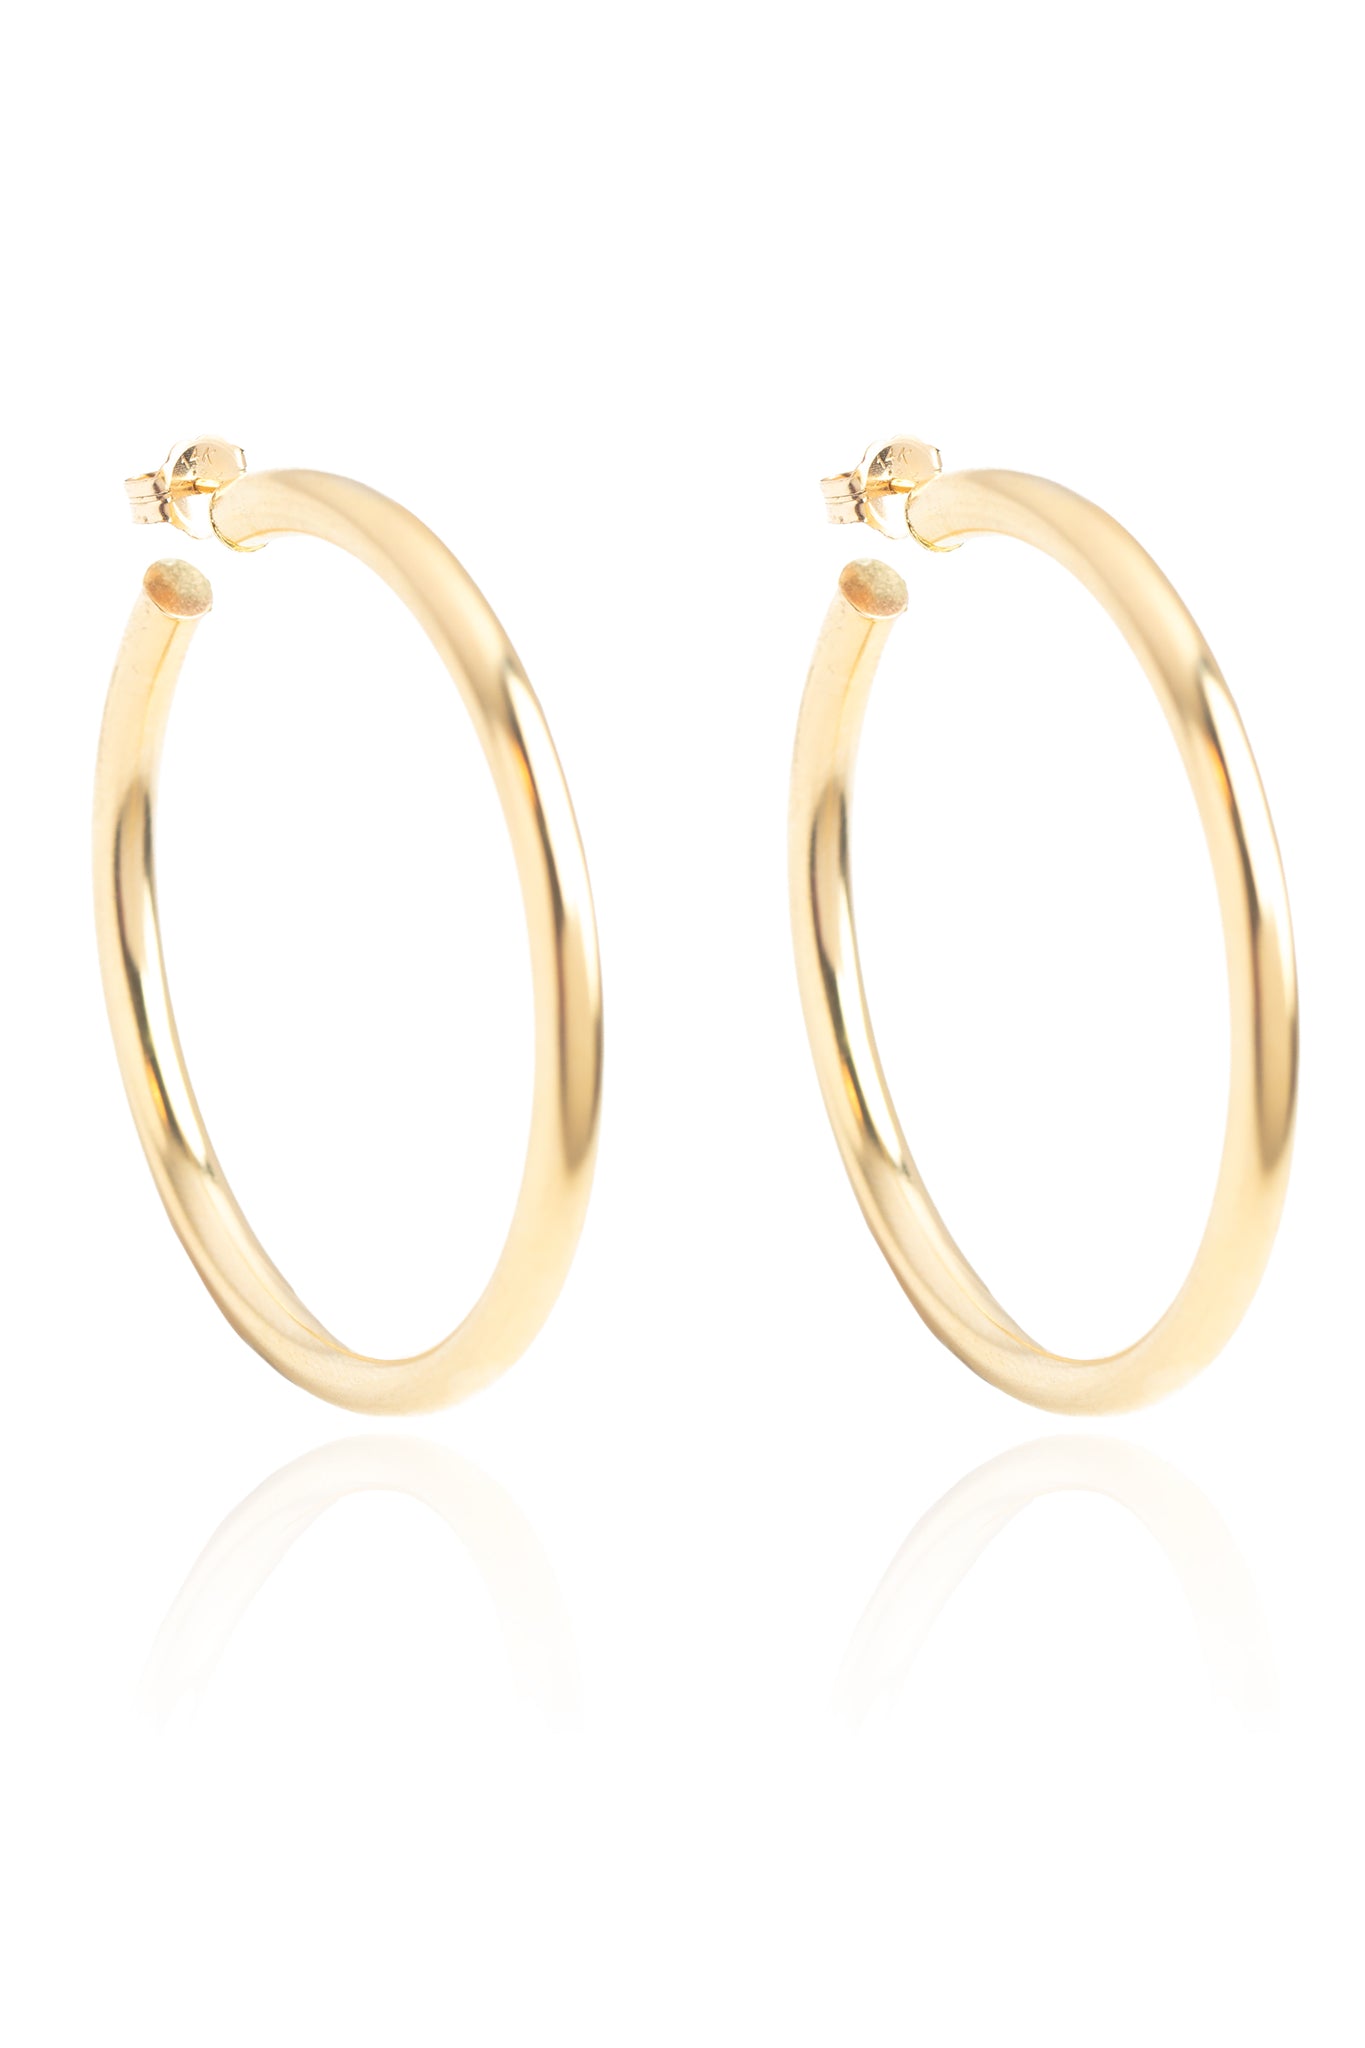 L.A. STEIN Large Chunky Hollow Hoop Earrings in Yellow Gold